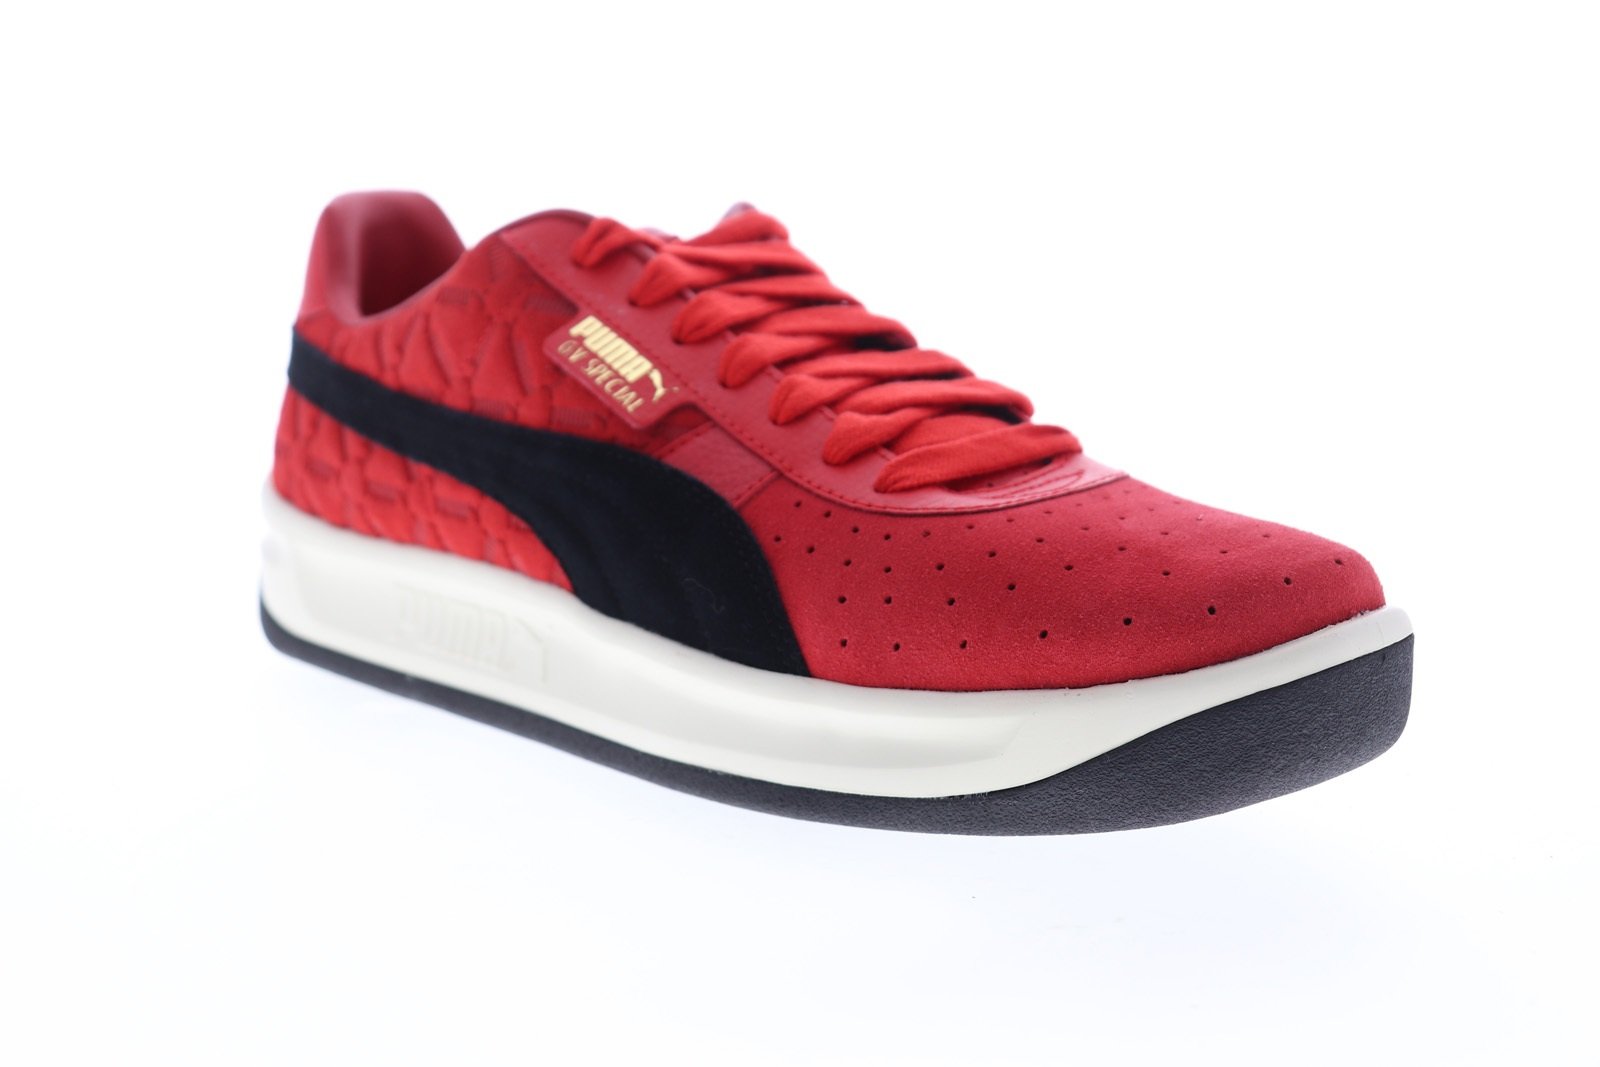 Puma Gv Special Lux 36928101 Mens Red Suede Lace Up Low Top Sneakers S ...